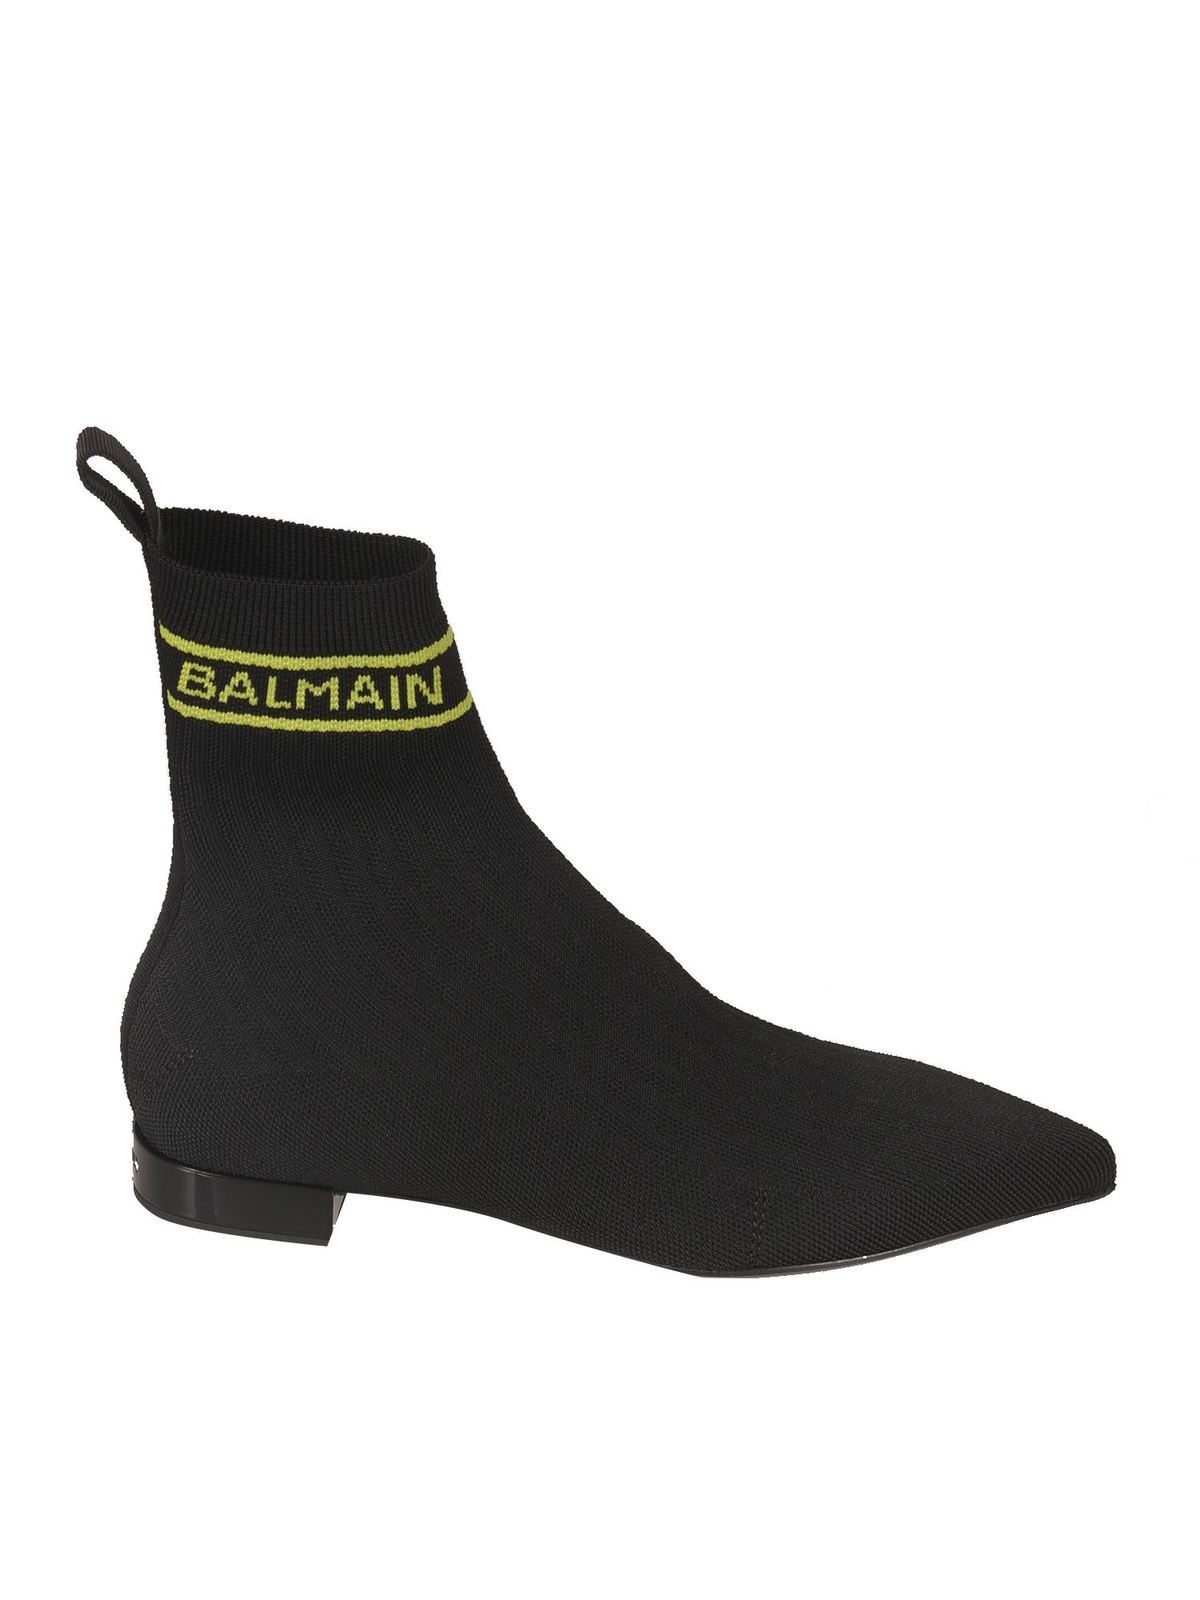 Balmain Leathers INLAID LOGO ANKLE BOOTS IN BLACK